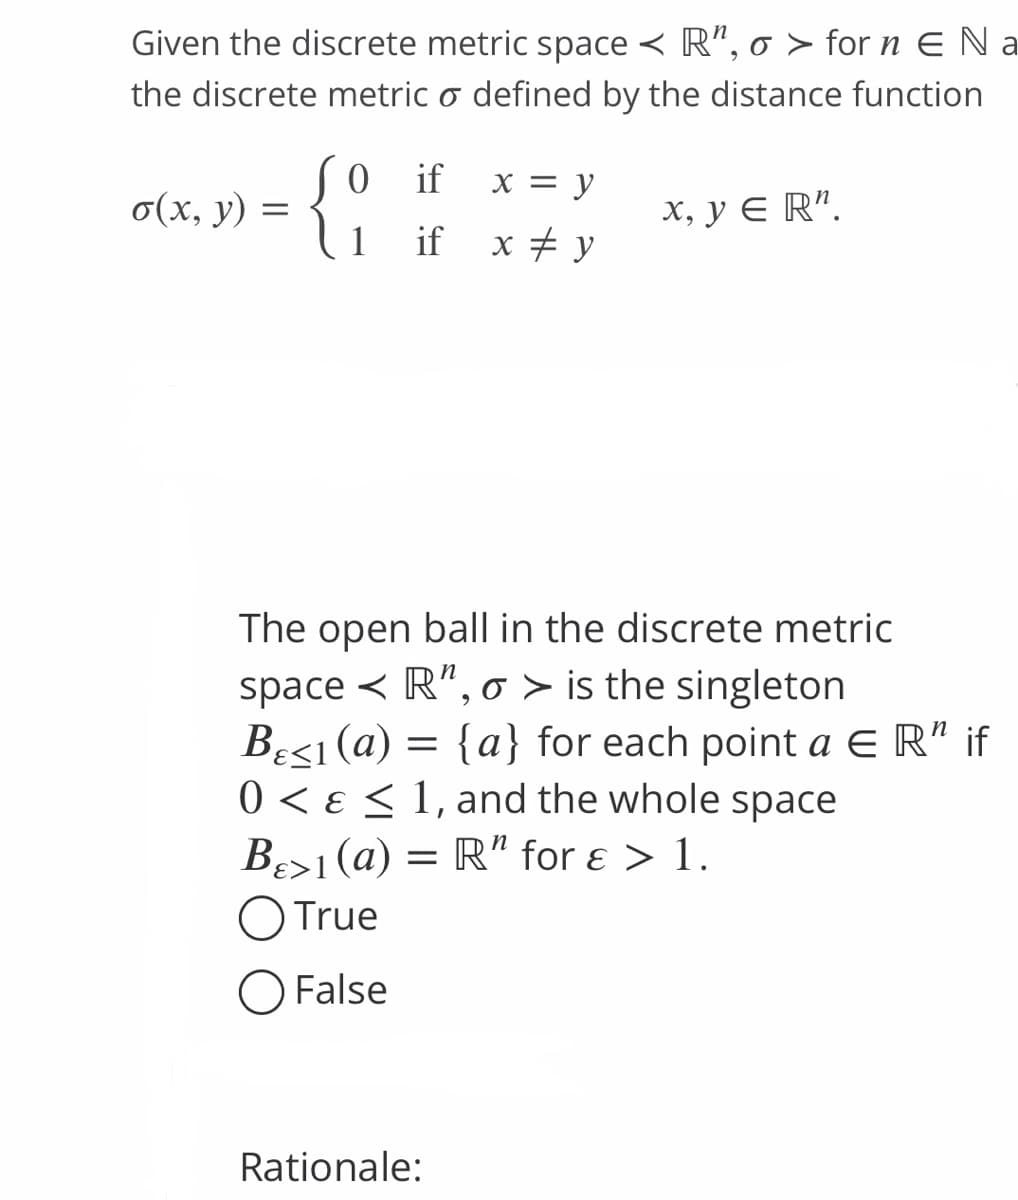 Given the discrete metric space < R", o > for n E Na
the discrete metric o defined by the distance function
o(x, y) =
0 if x = y
if x # y
x, y = R¹.
1
The open ball in the discrete metric
space < R", o > is the singleton
B<1 (a) = {a} for each point a ER" if
0 < < 1, and the whole space
B>1(a) = R" for ε > 1.
O True
O False
Rationale: